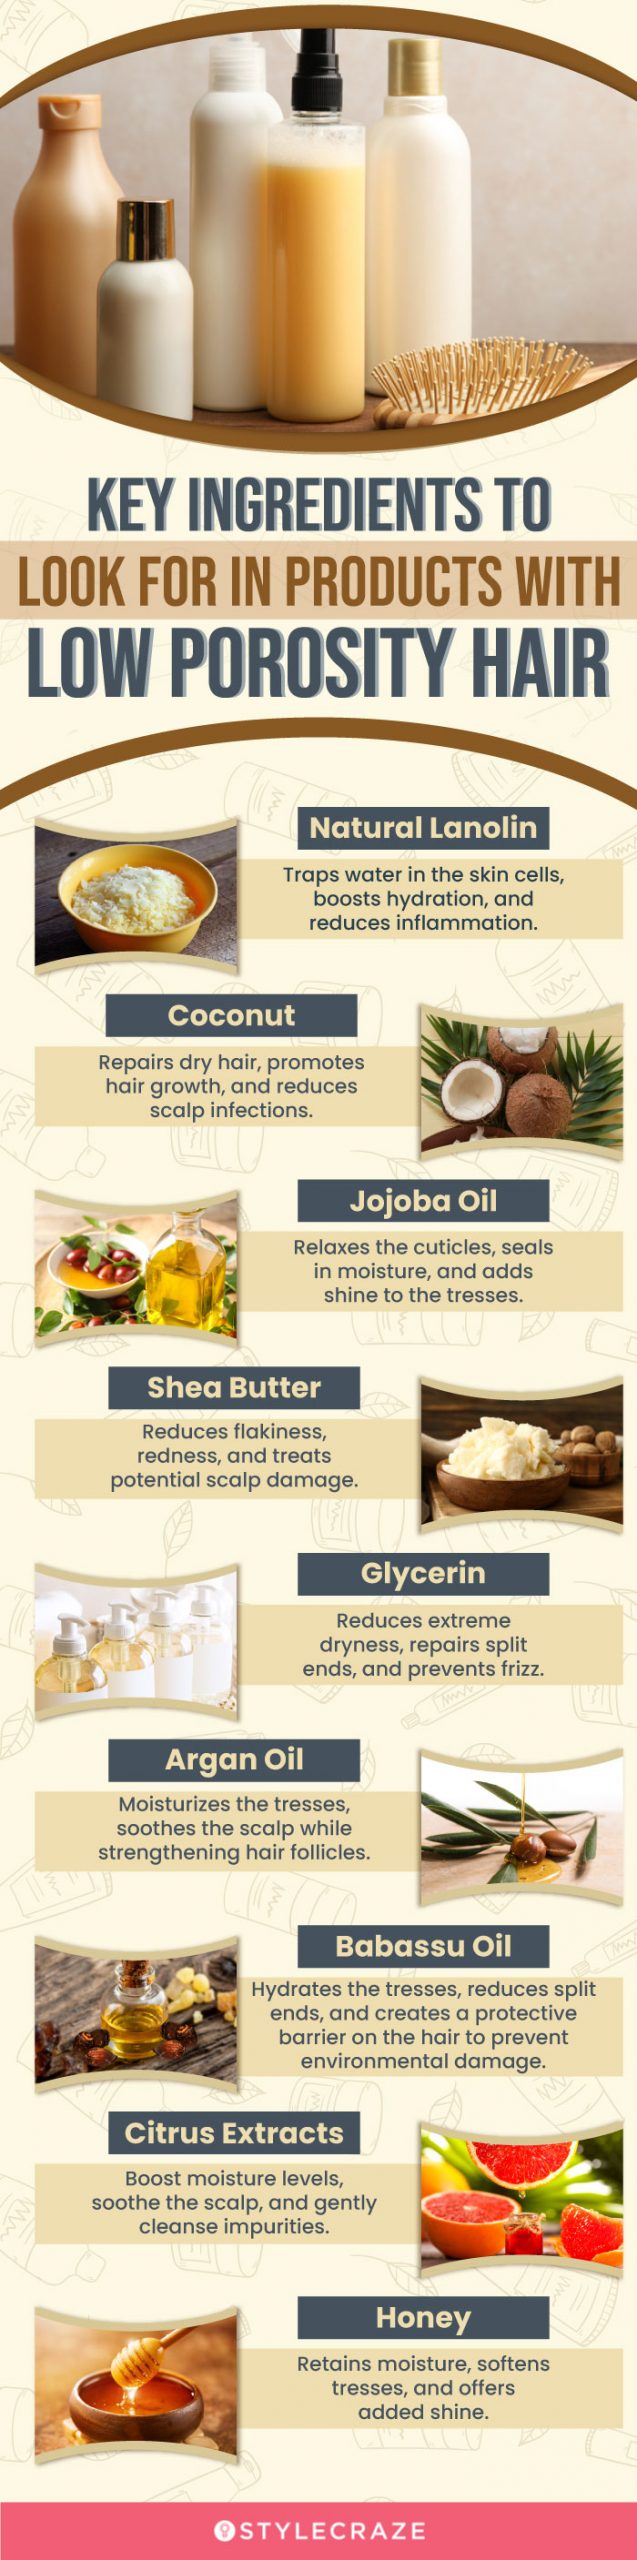 Key Ingredients To Look For In Products With Low Porosity Hair (infographic)